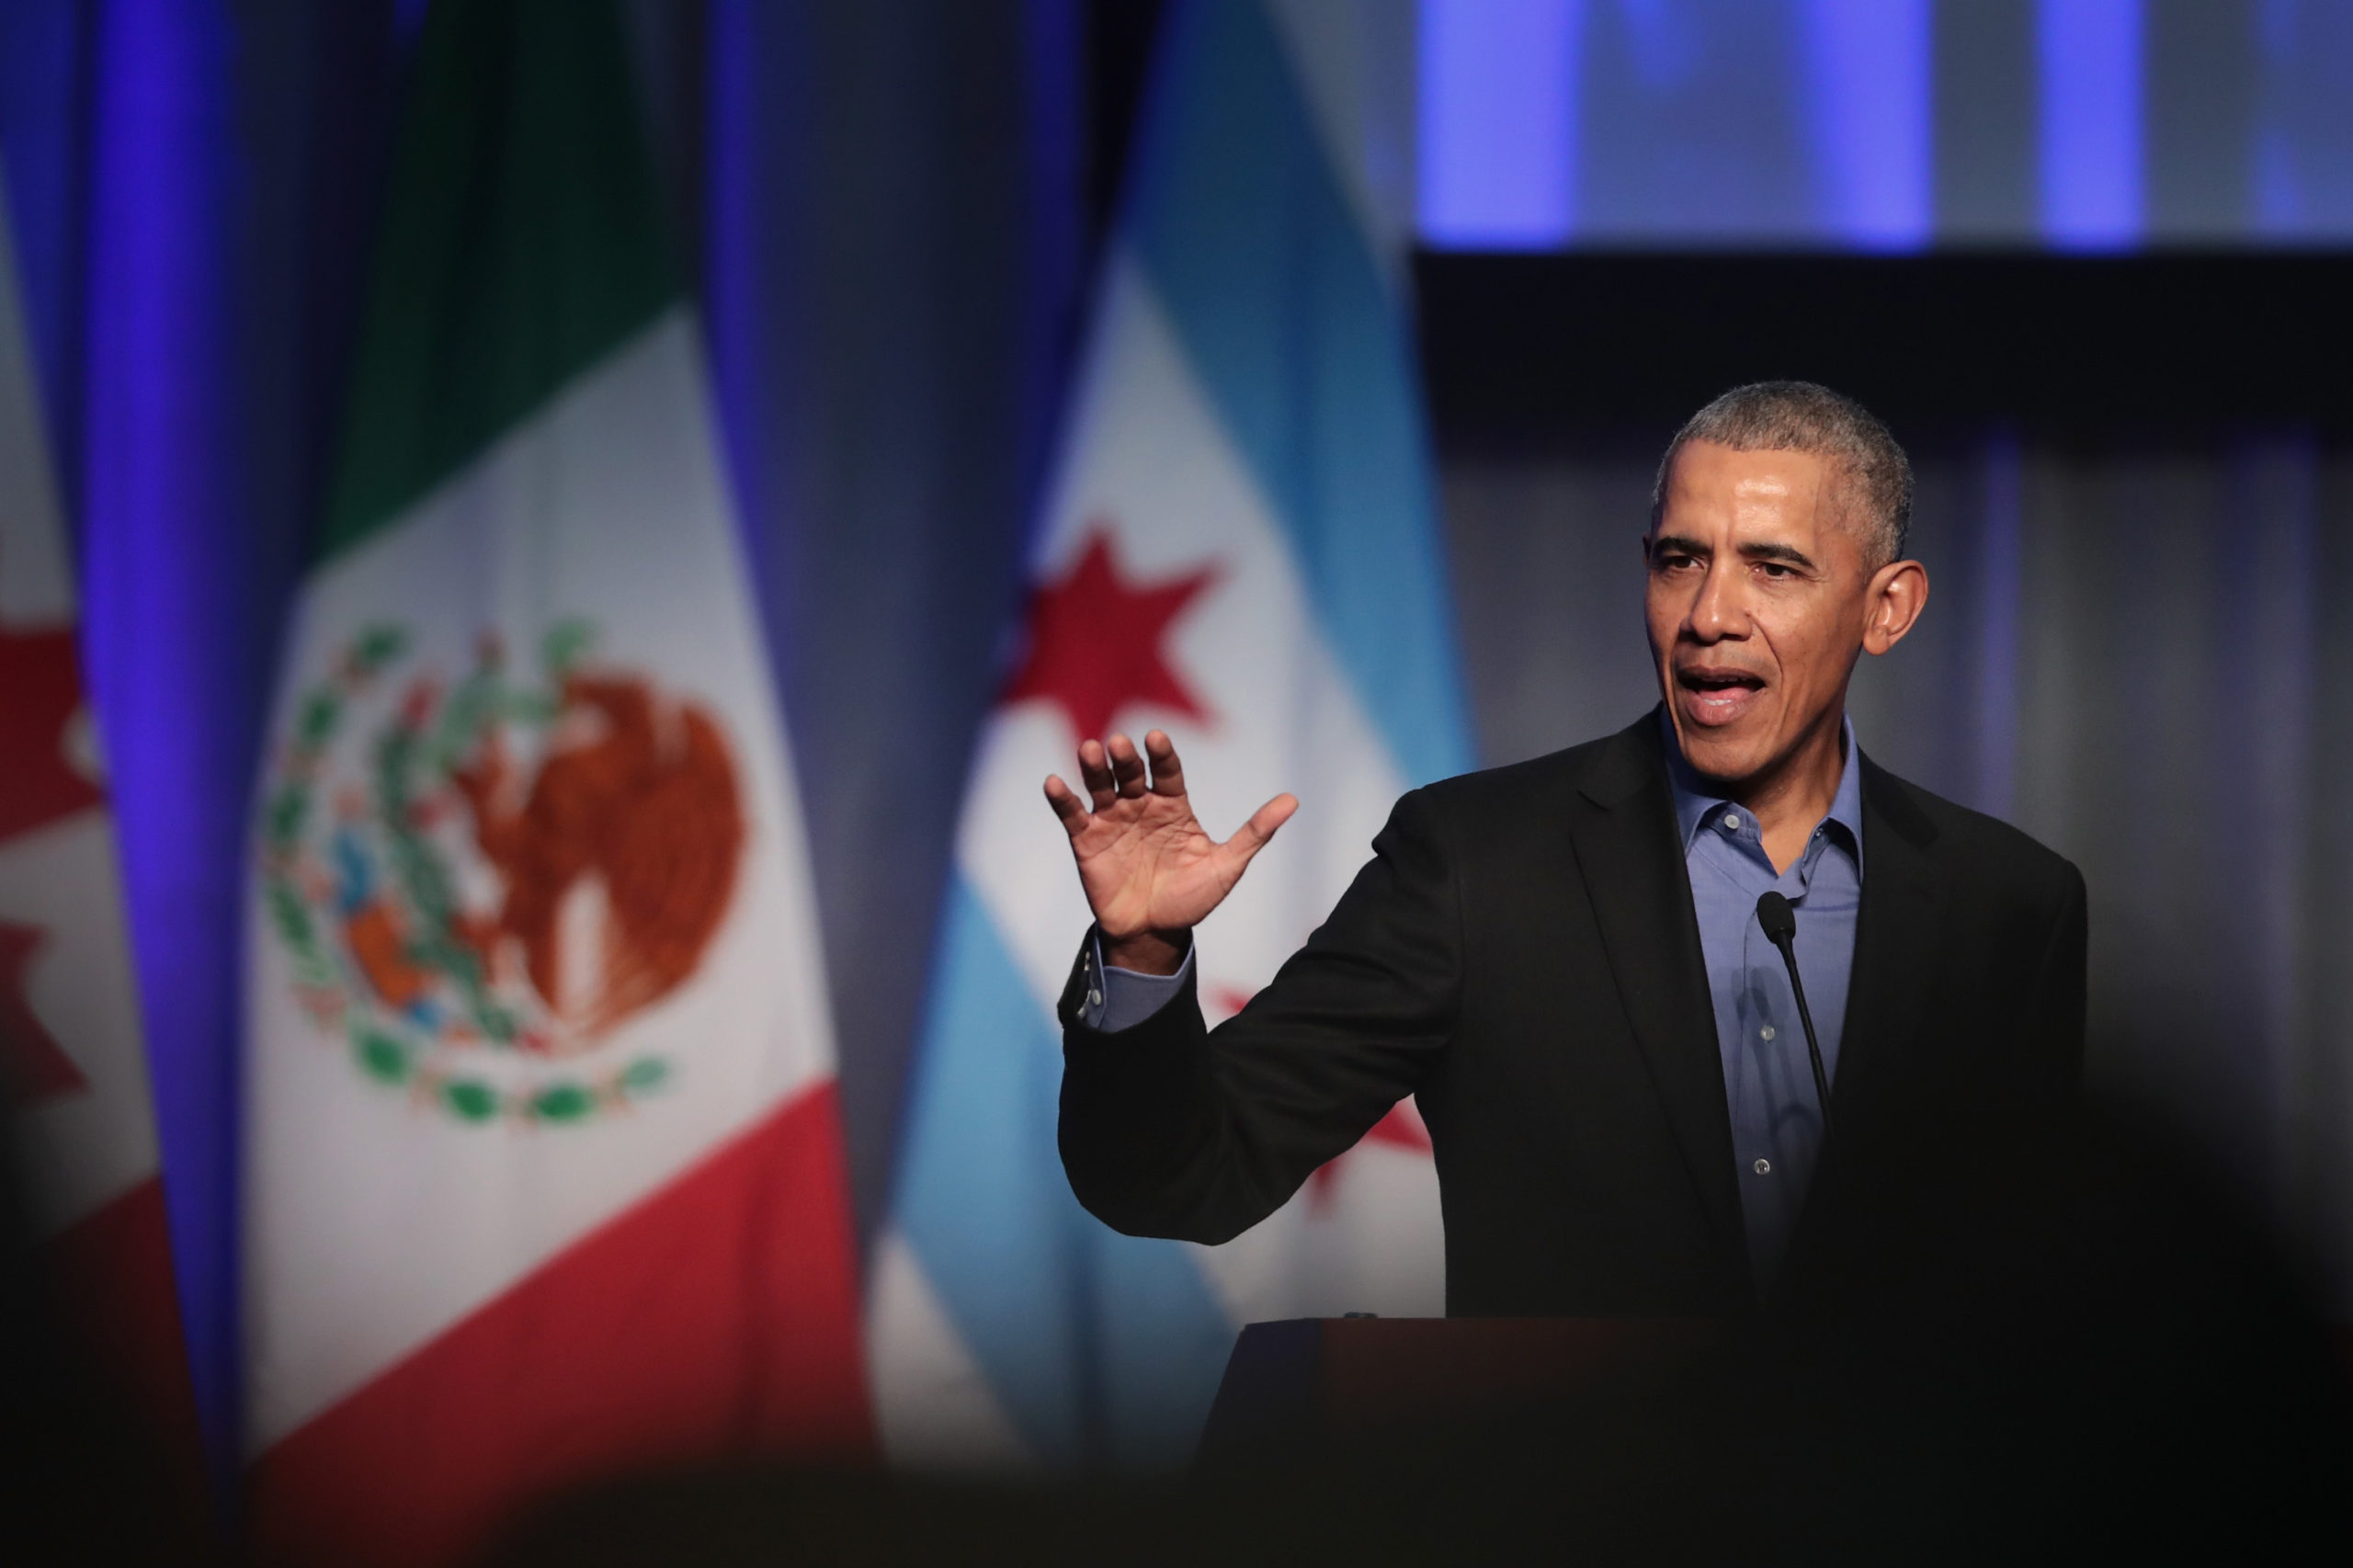 Former president Barack Obama speaks during a 2017 climate summit in Chicago. (Scott Olson/Getty Images)